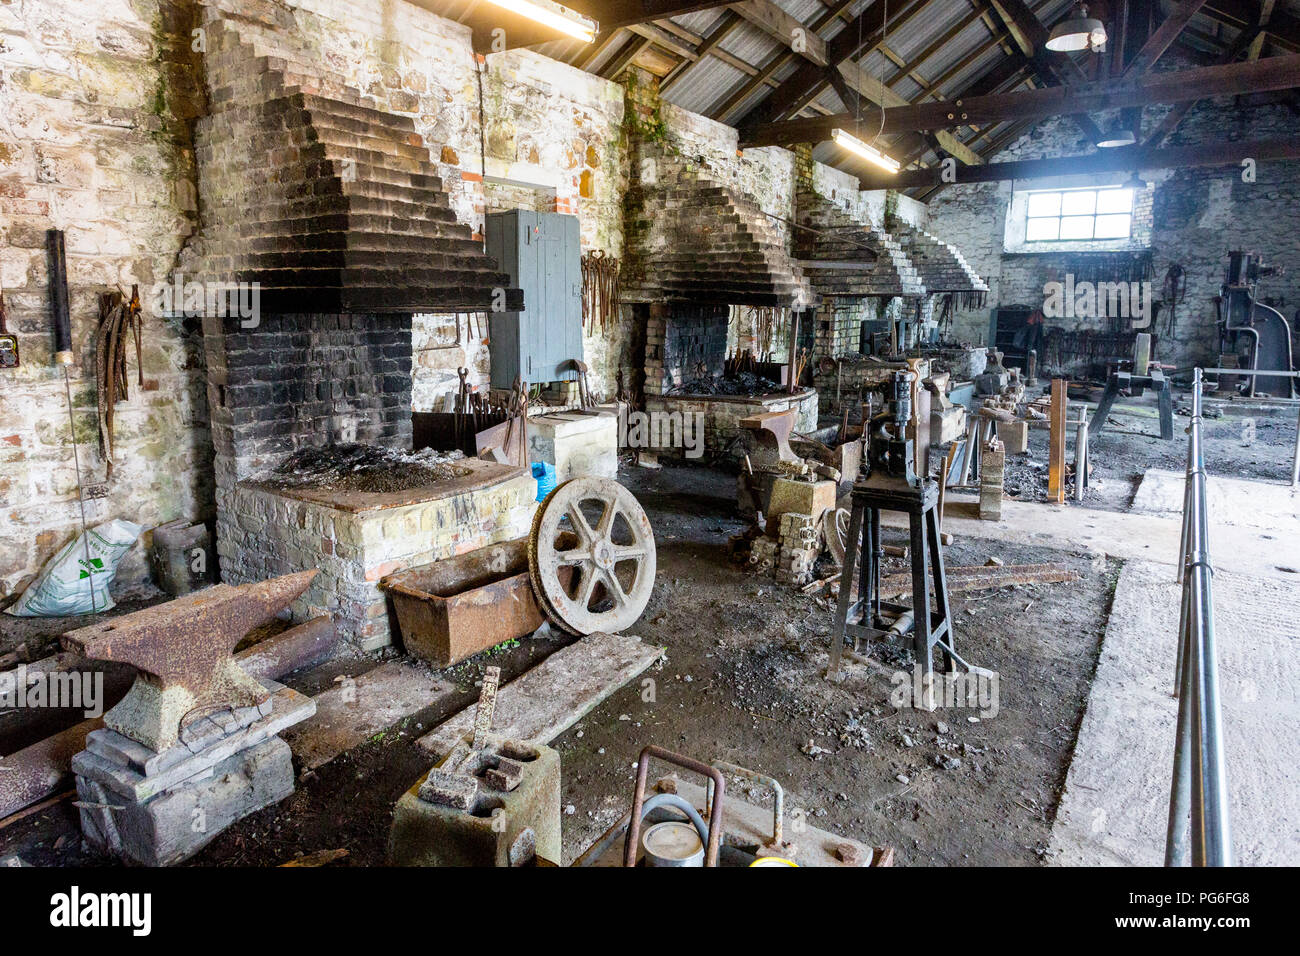 The foundry with its row of forges at Big Pit - a former coal mine now a UNESCO World Heritage Site in Blaenavon, Gwent, Wales, UK Stock Photo